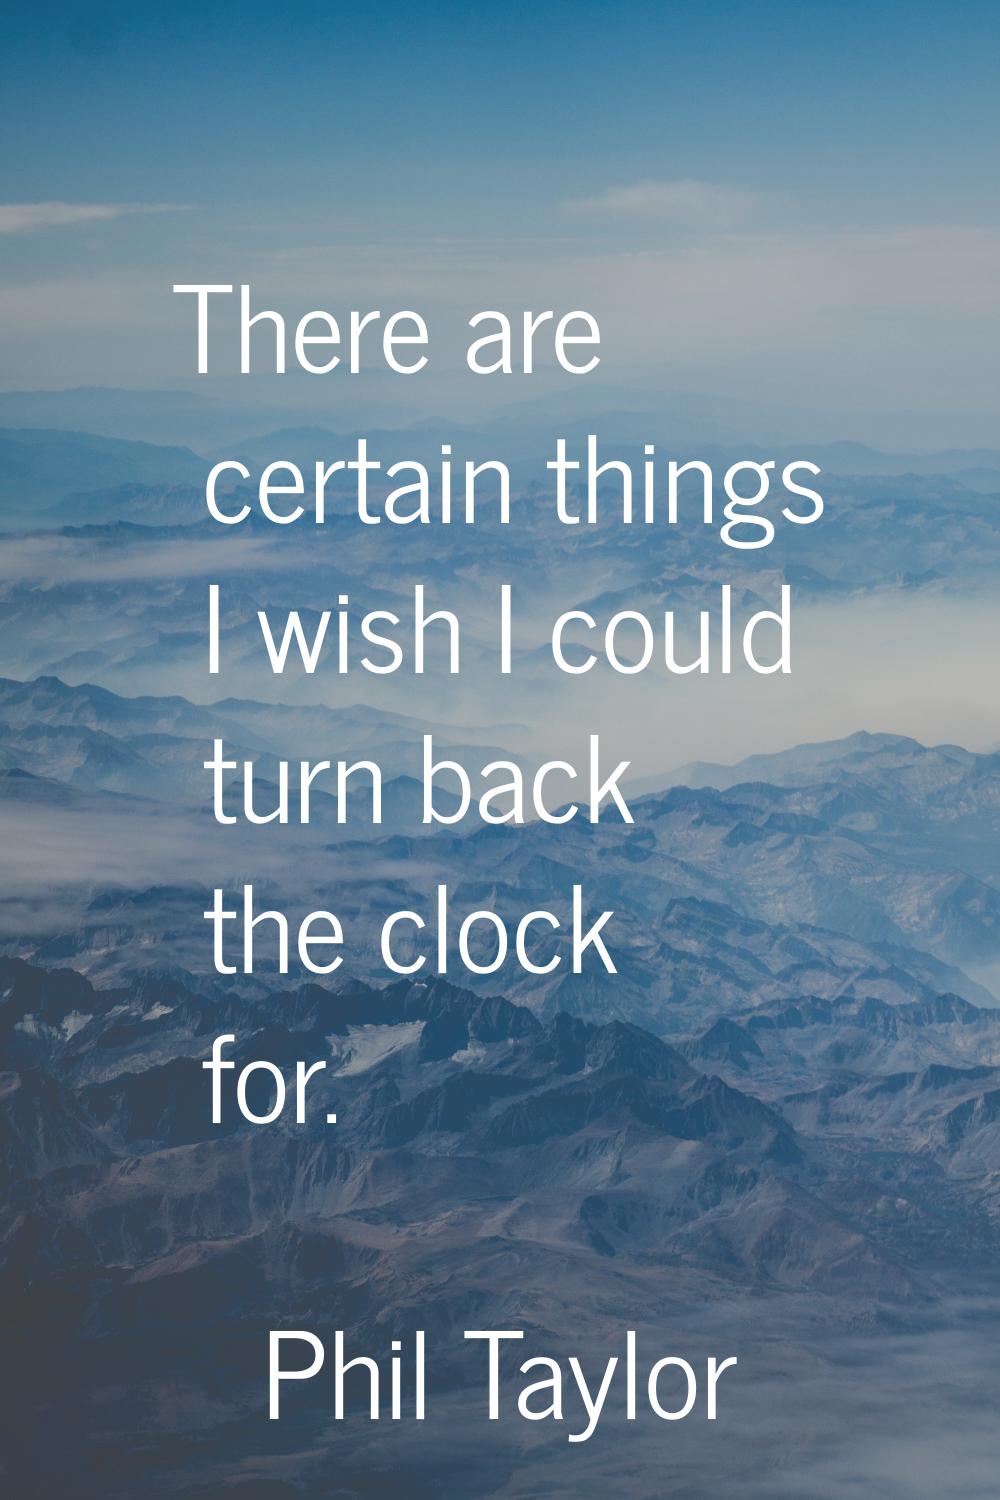 There are certain things I wish I could turn back the clock for.